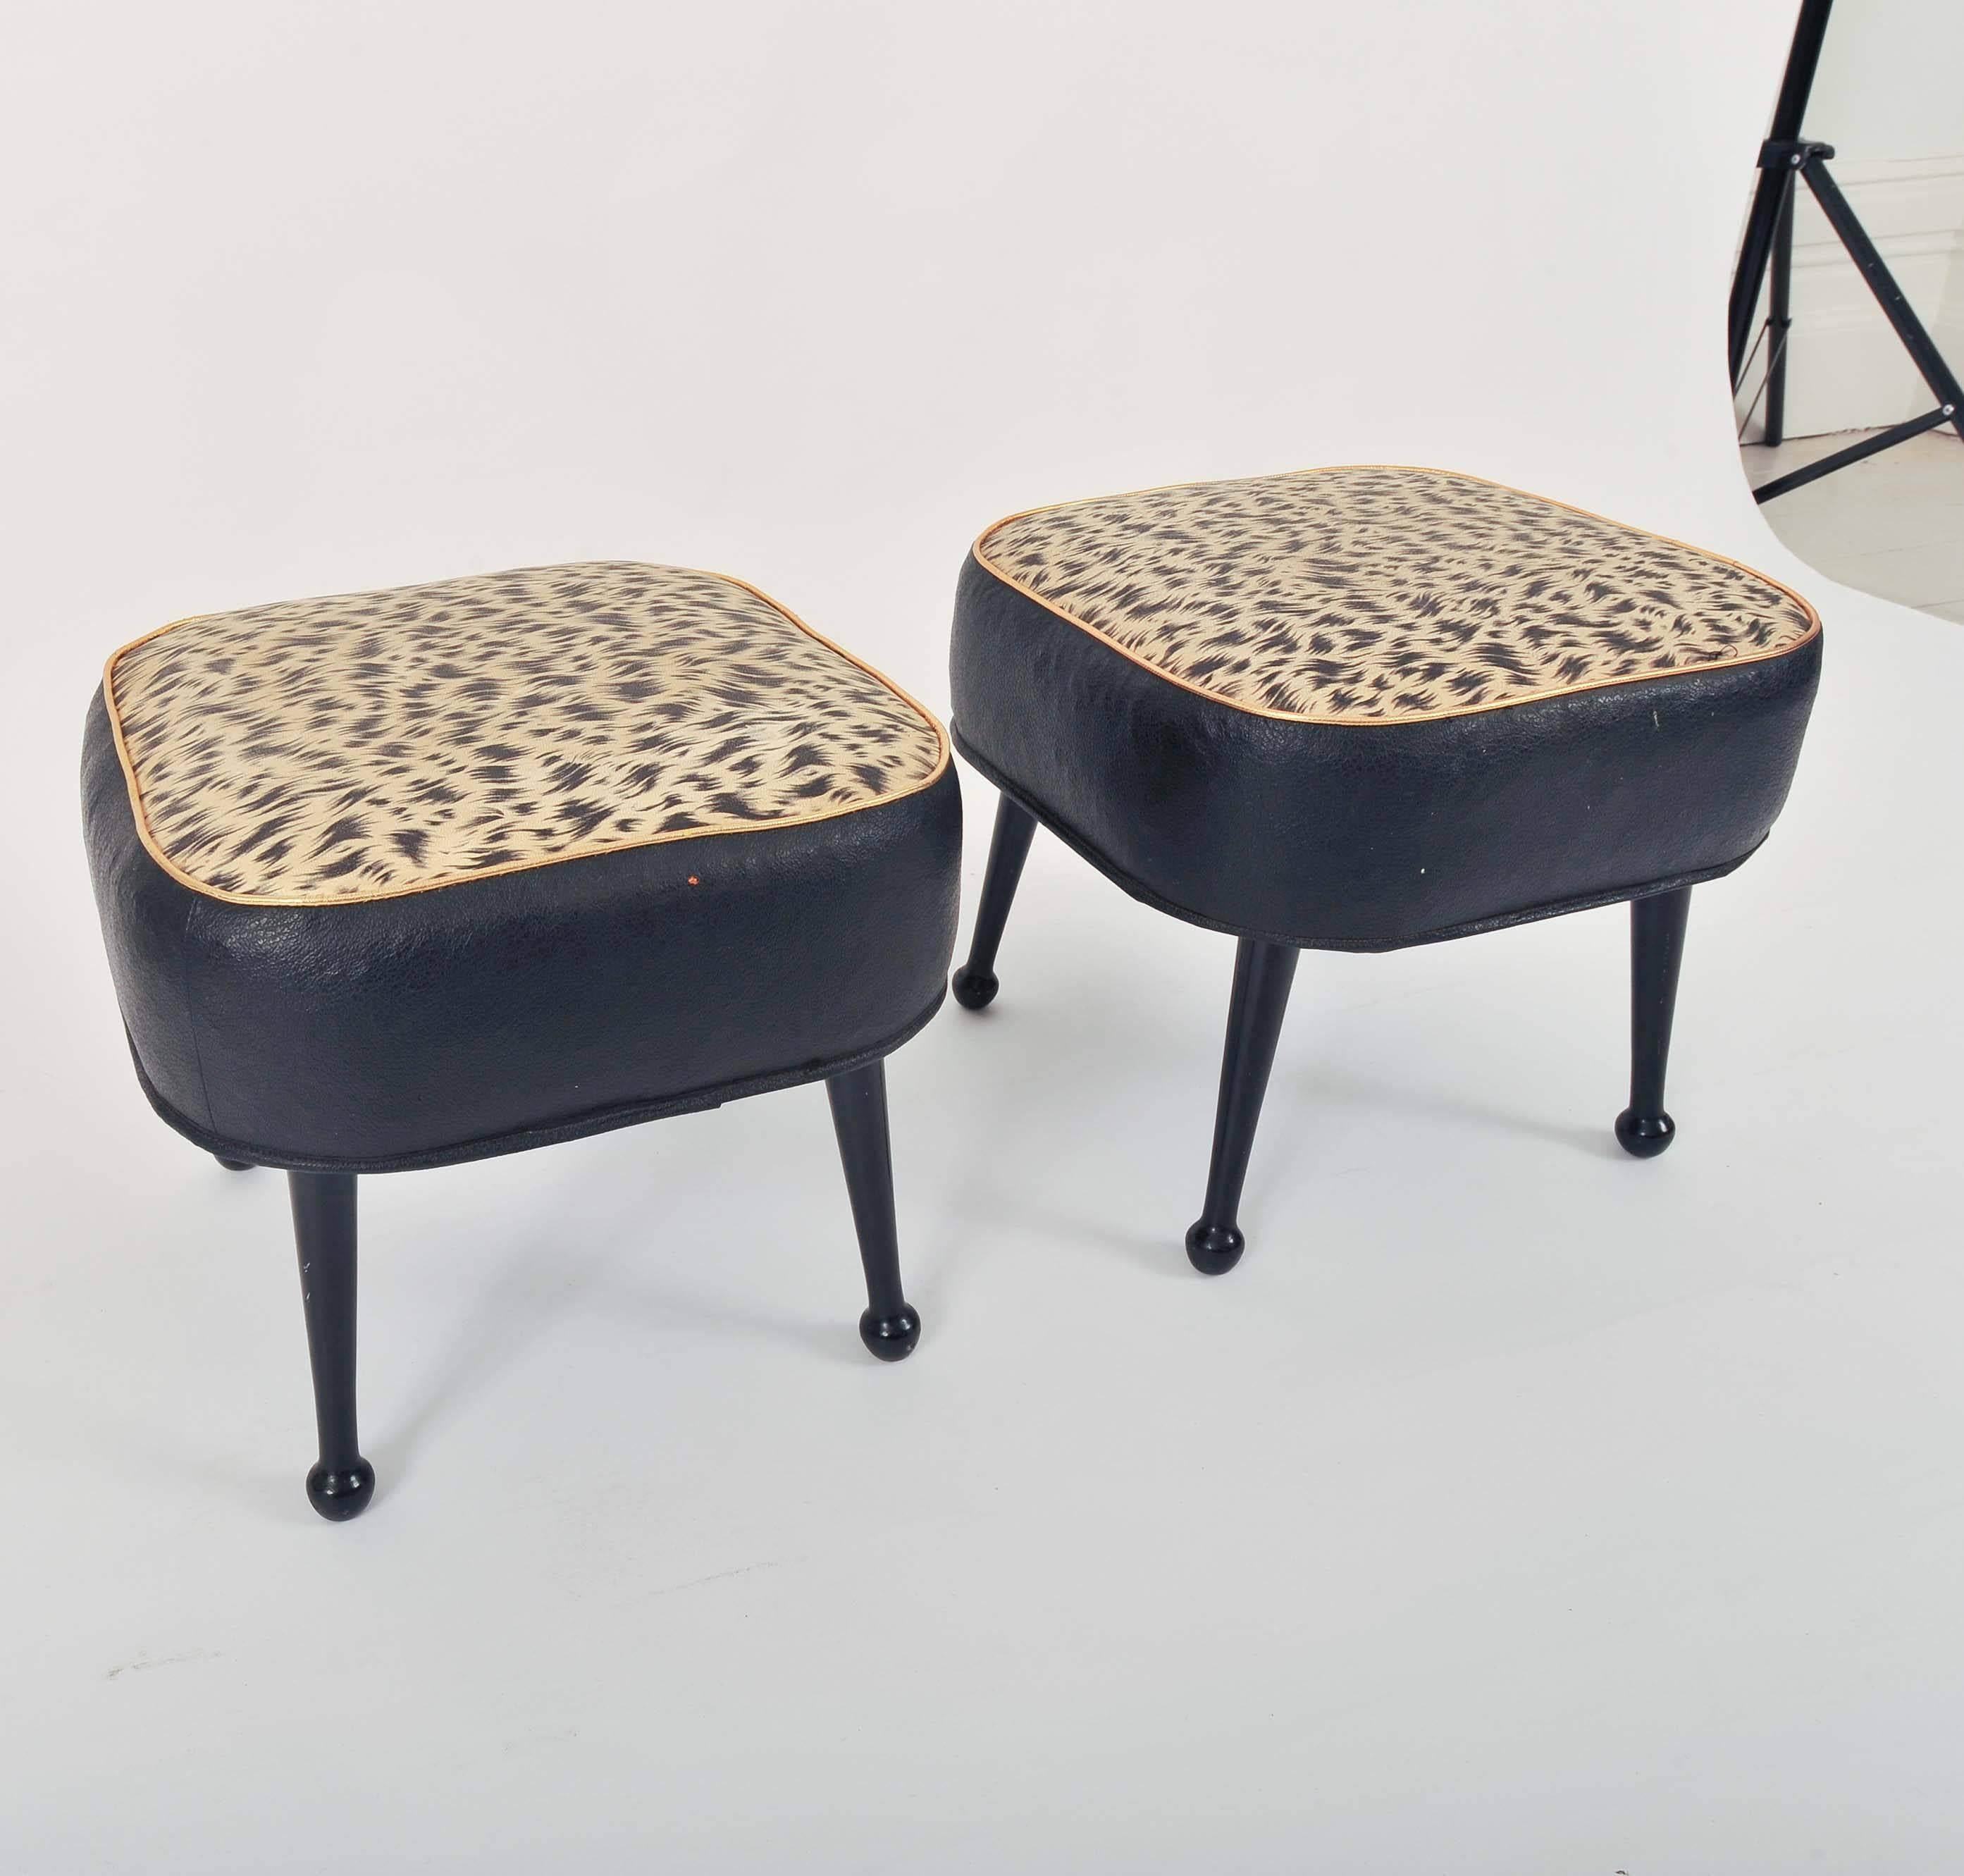 An unusual pair of 1950s faux leather stools.